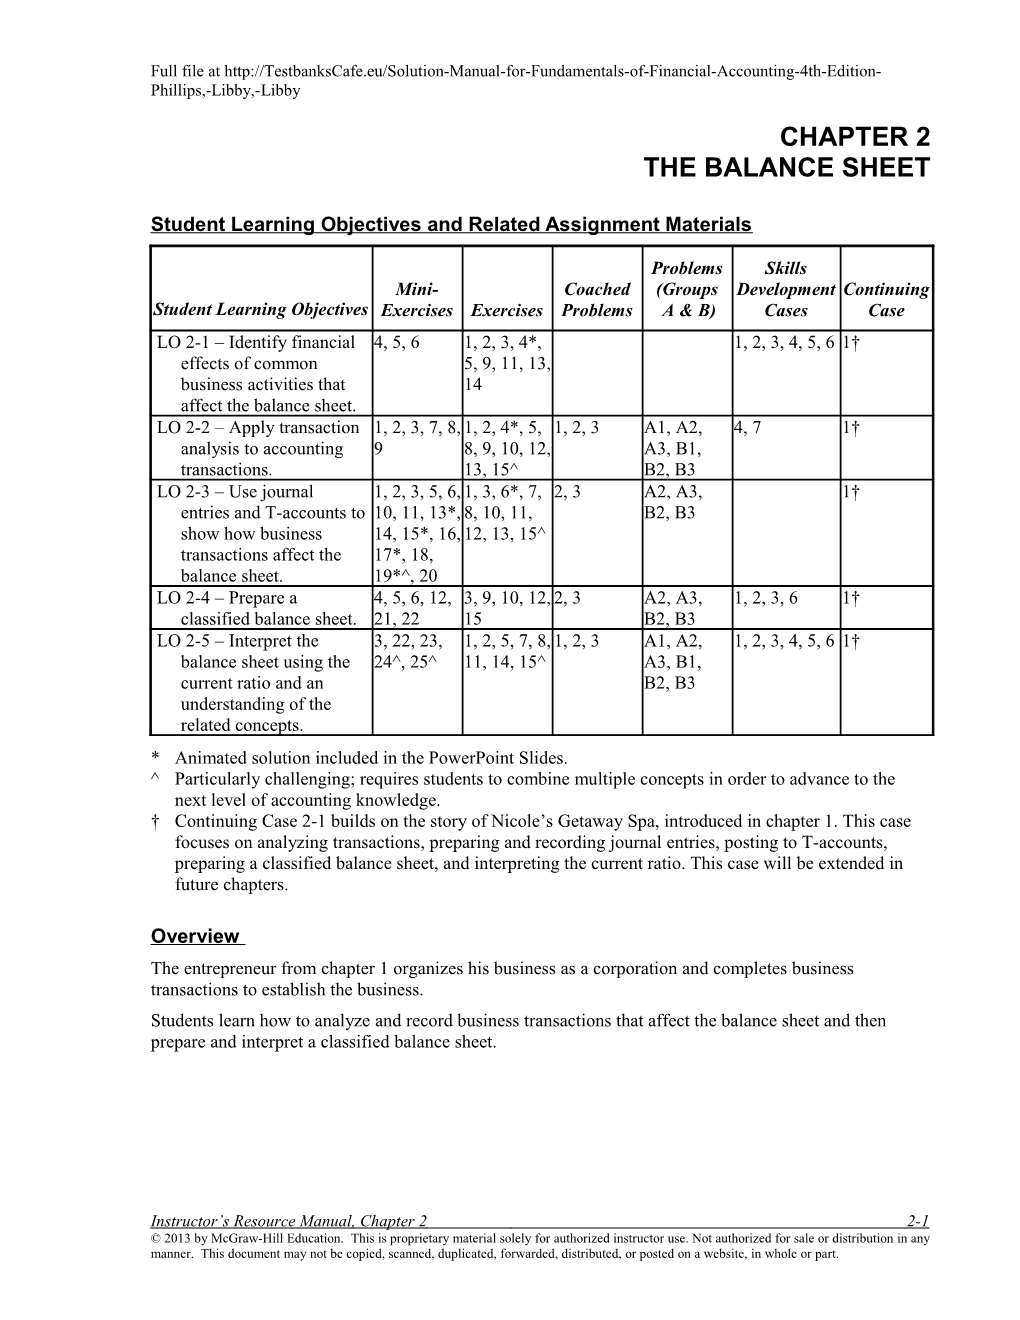 Student Learning Objectives and Related Assignment Materials